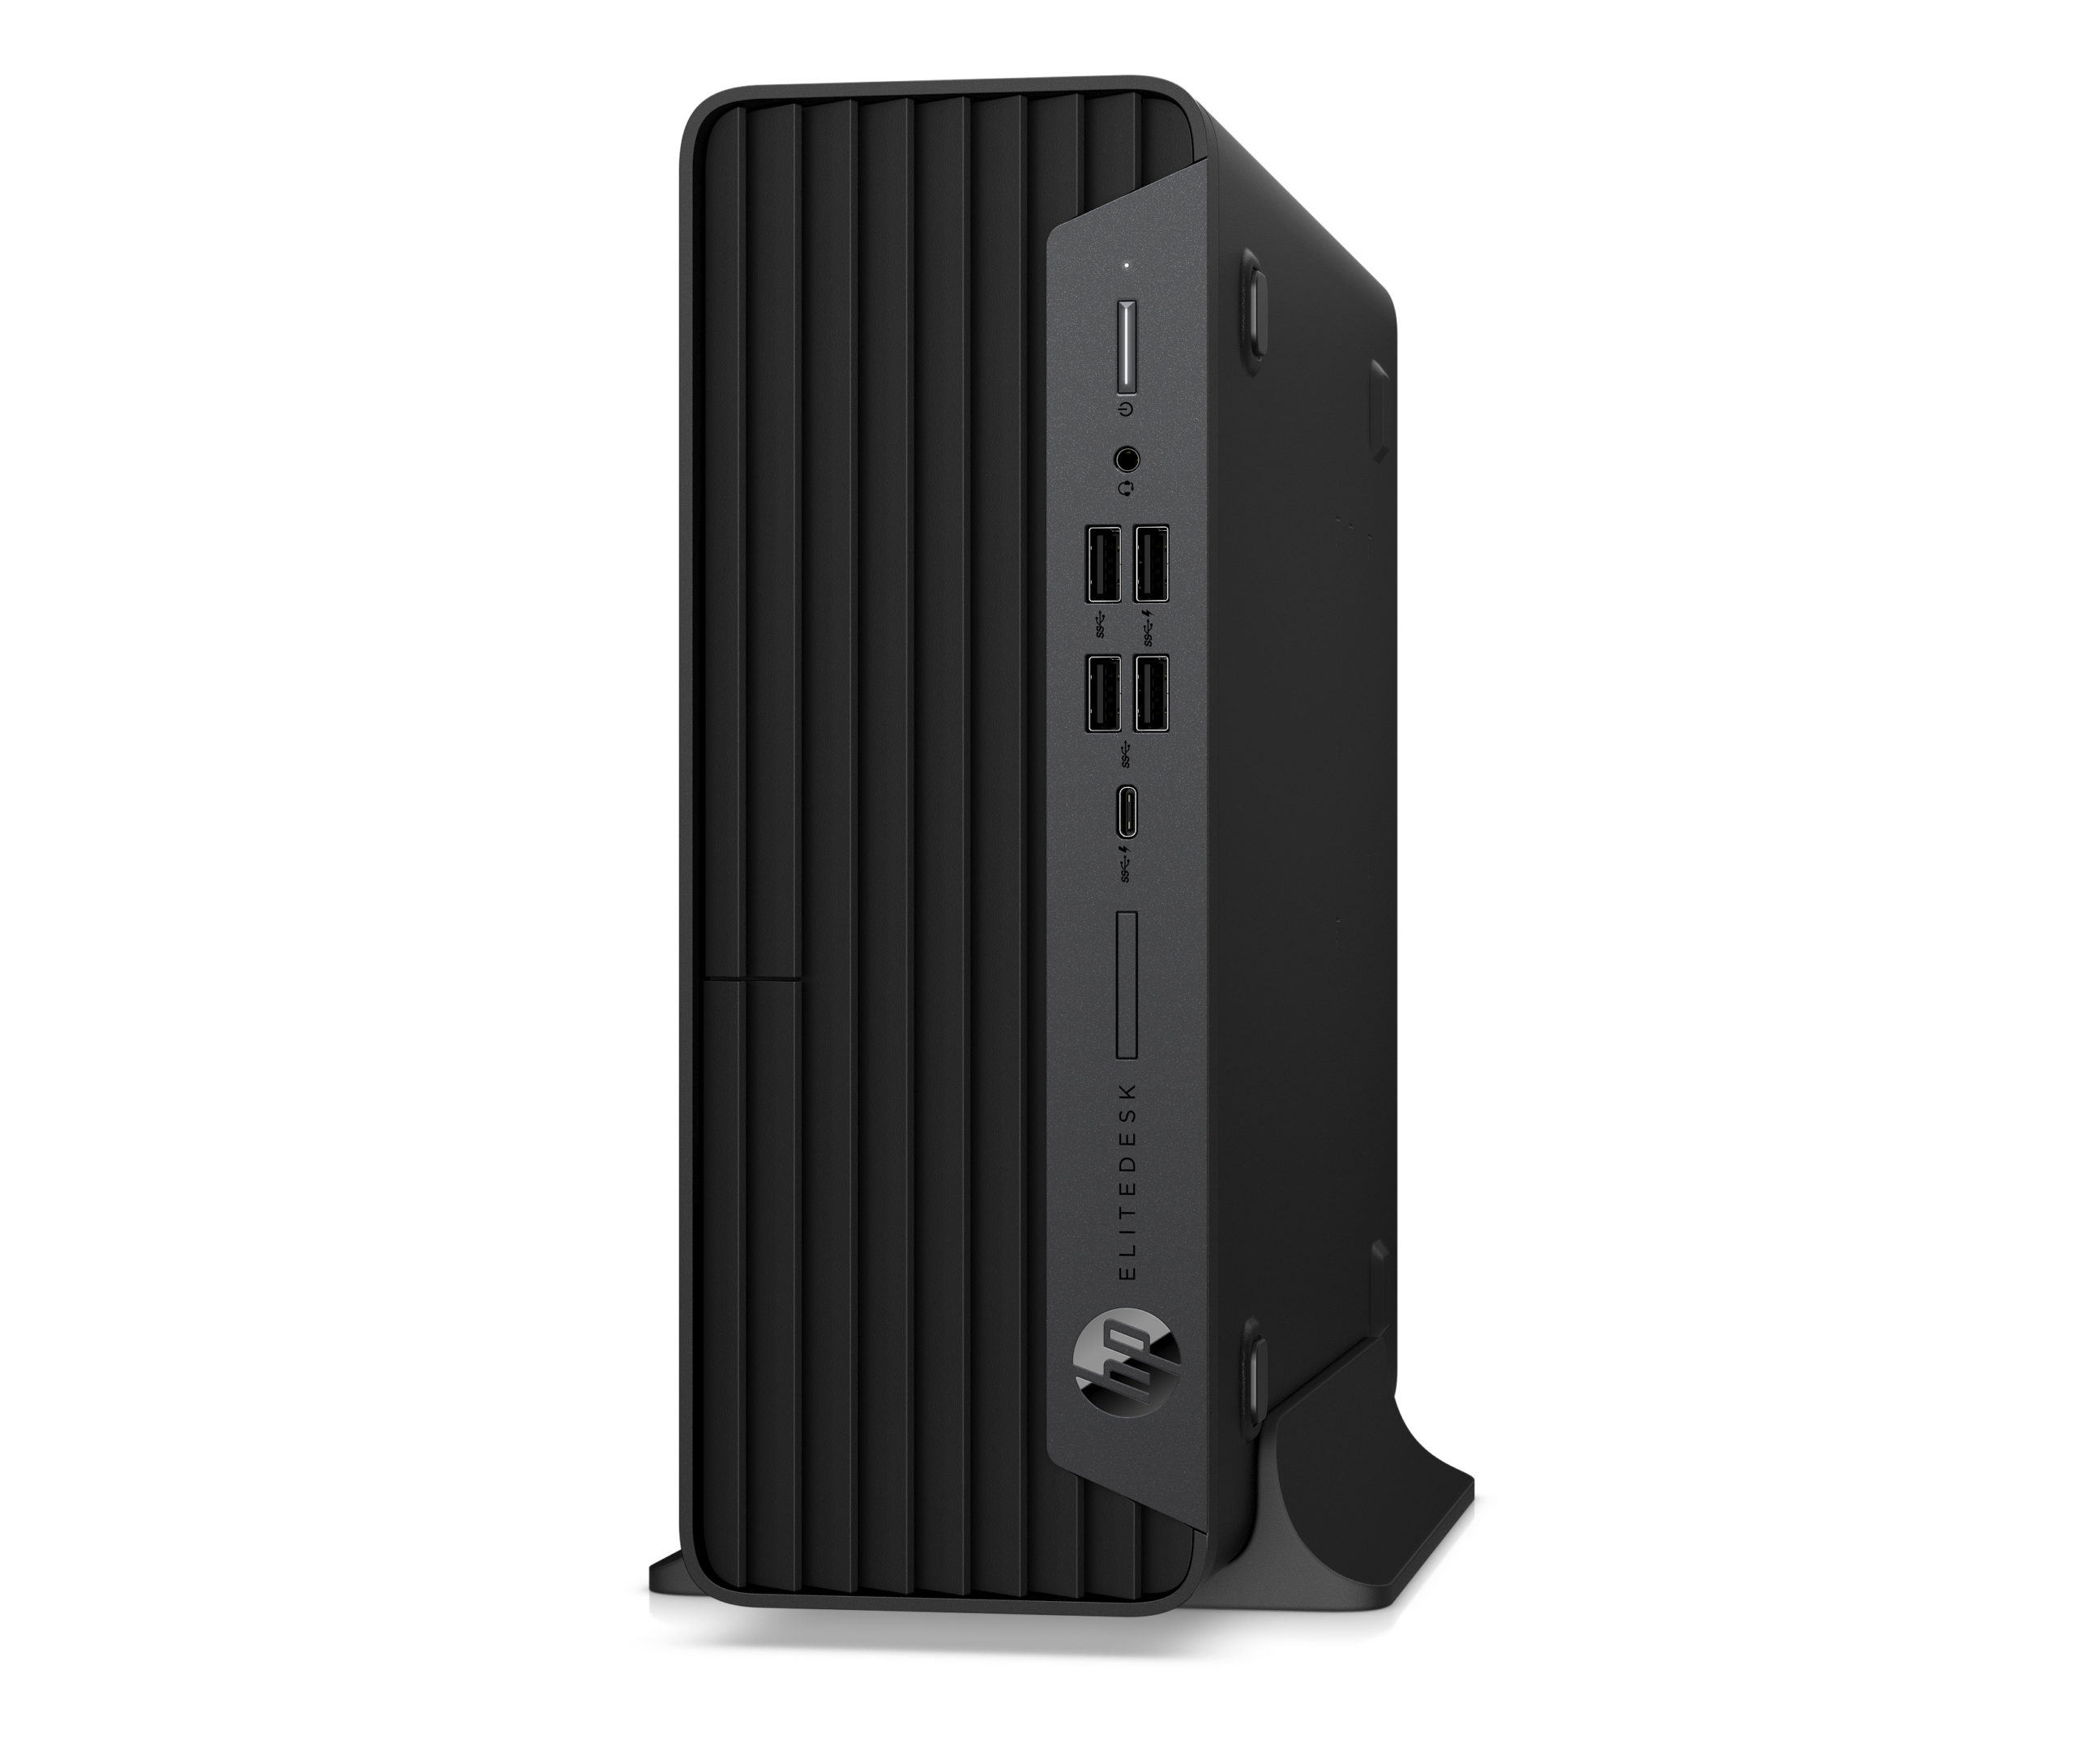 HP EliteDesk 806 G6 Small Form Factor, tower upright on a flat surface